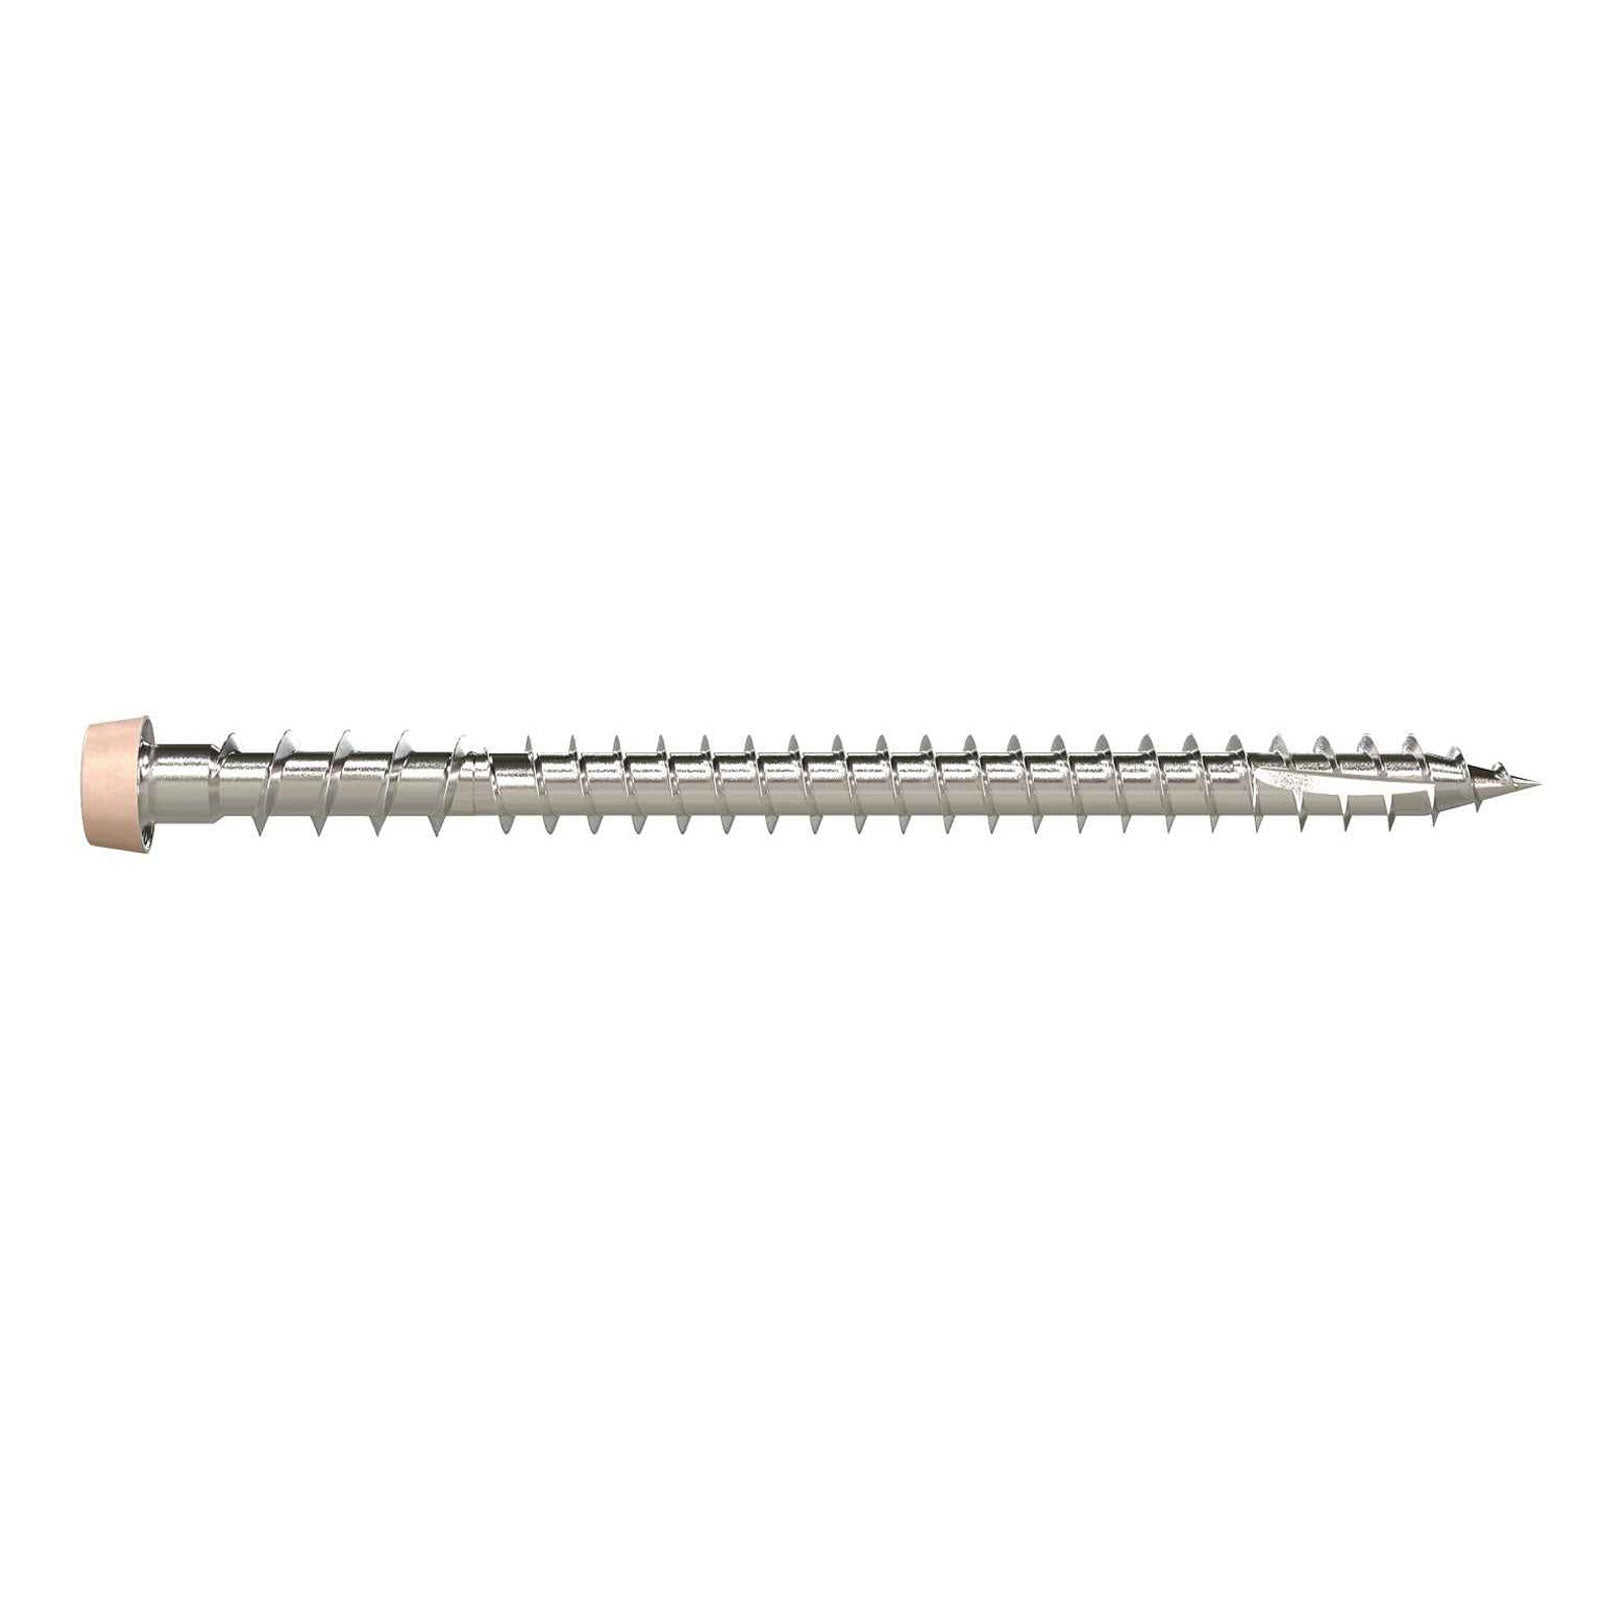 #10 x 2-3/4" 316 Stainless Steel DCU Composite Decking Screw - Tan05